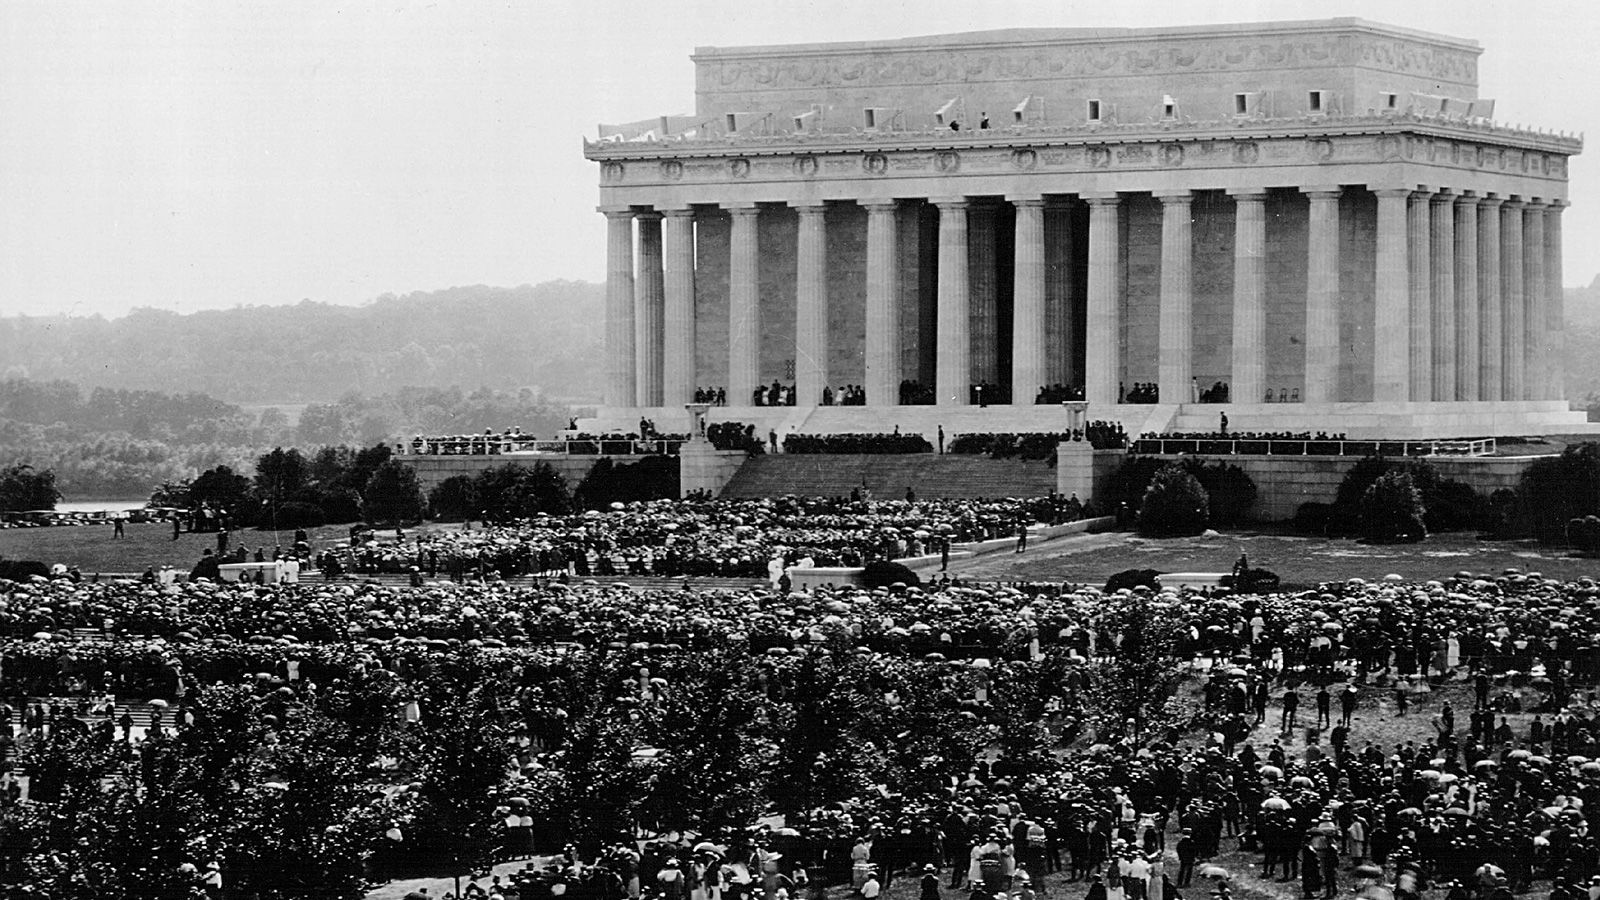 <strong>Dedication:</strong> Crowds gather outside the Lincoln Memorial for a Memorial Day dedication in 1922. The seating was segregated by race, but the organizers chose Dr. Robert Moton, president of Tuskegee Institute, as the keynote speaker.  